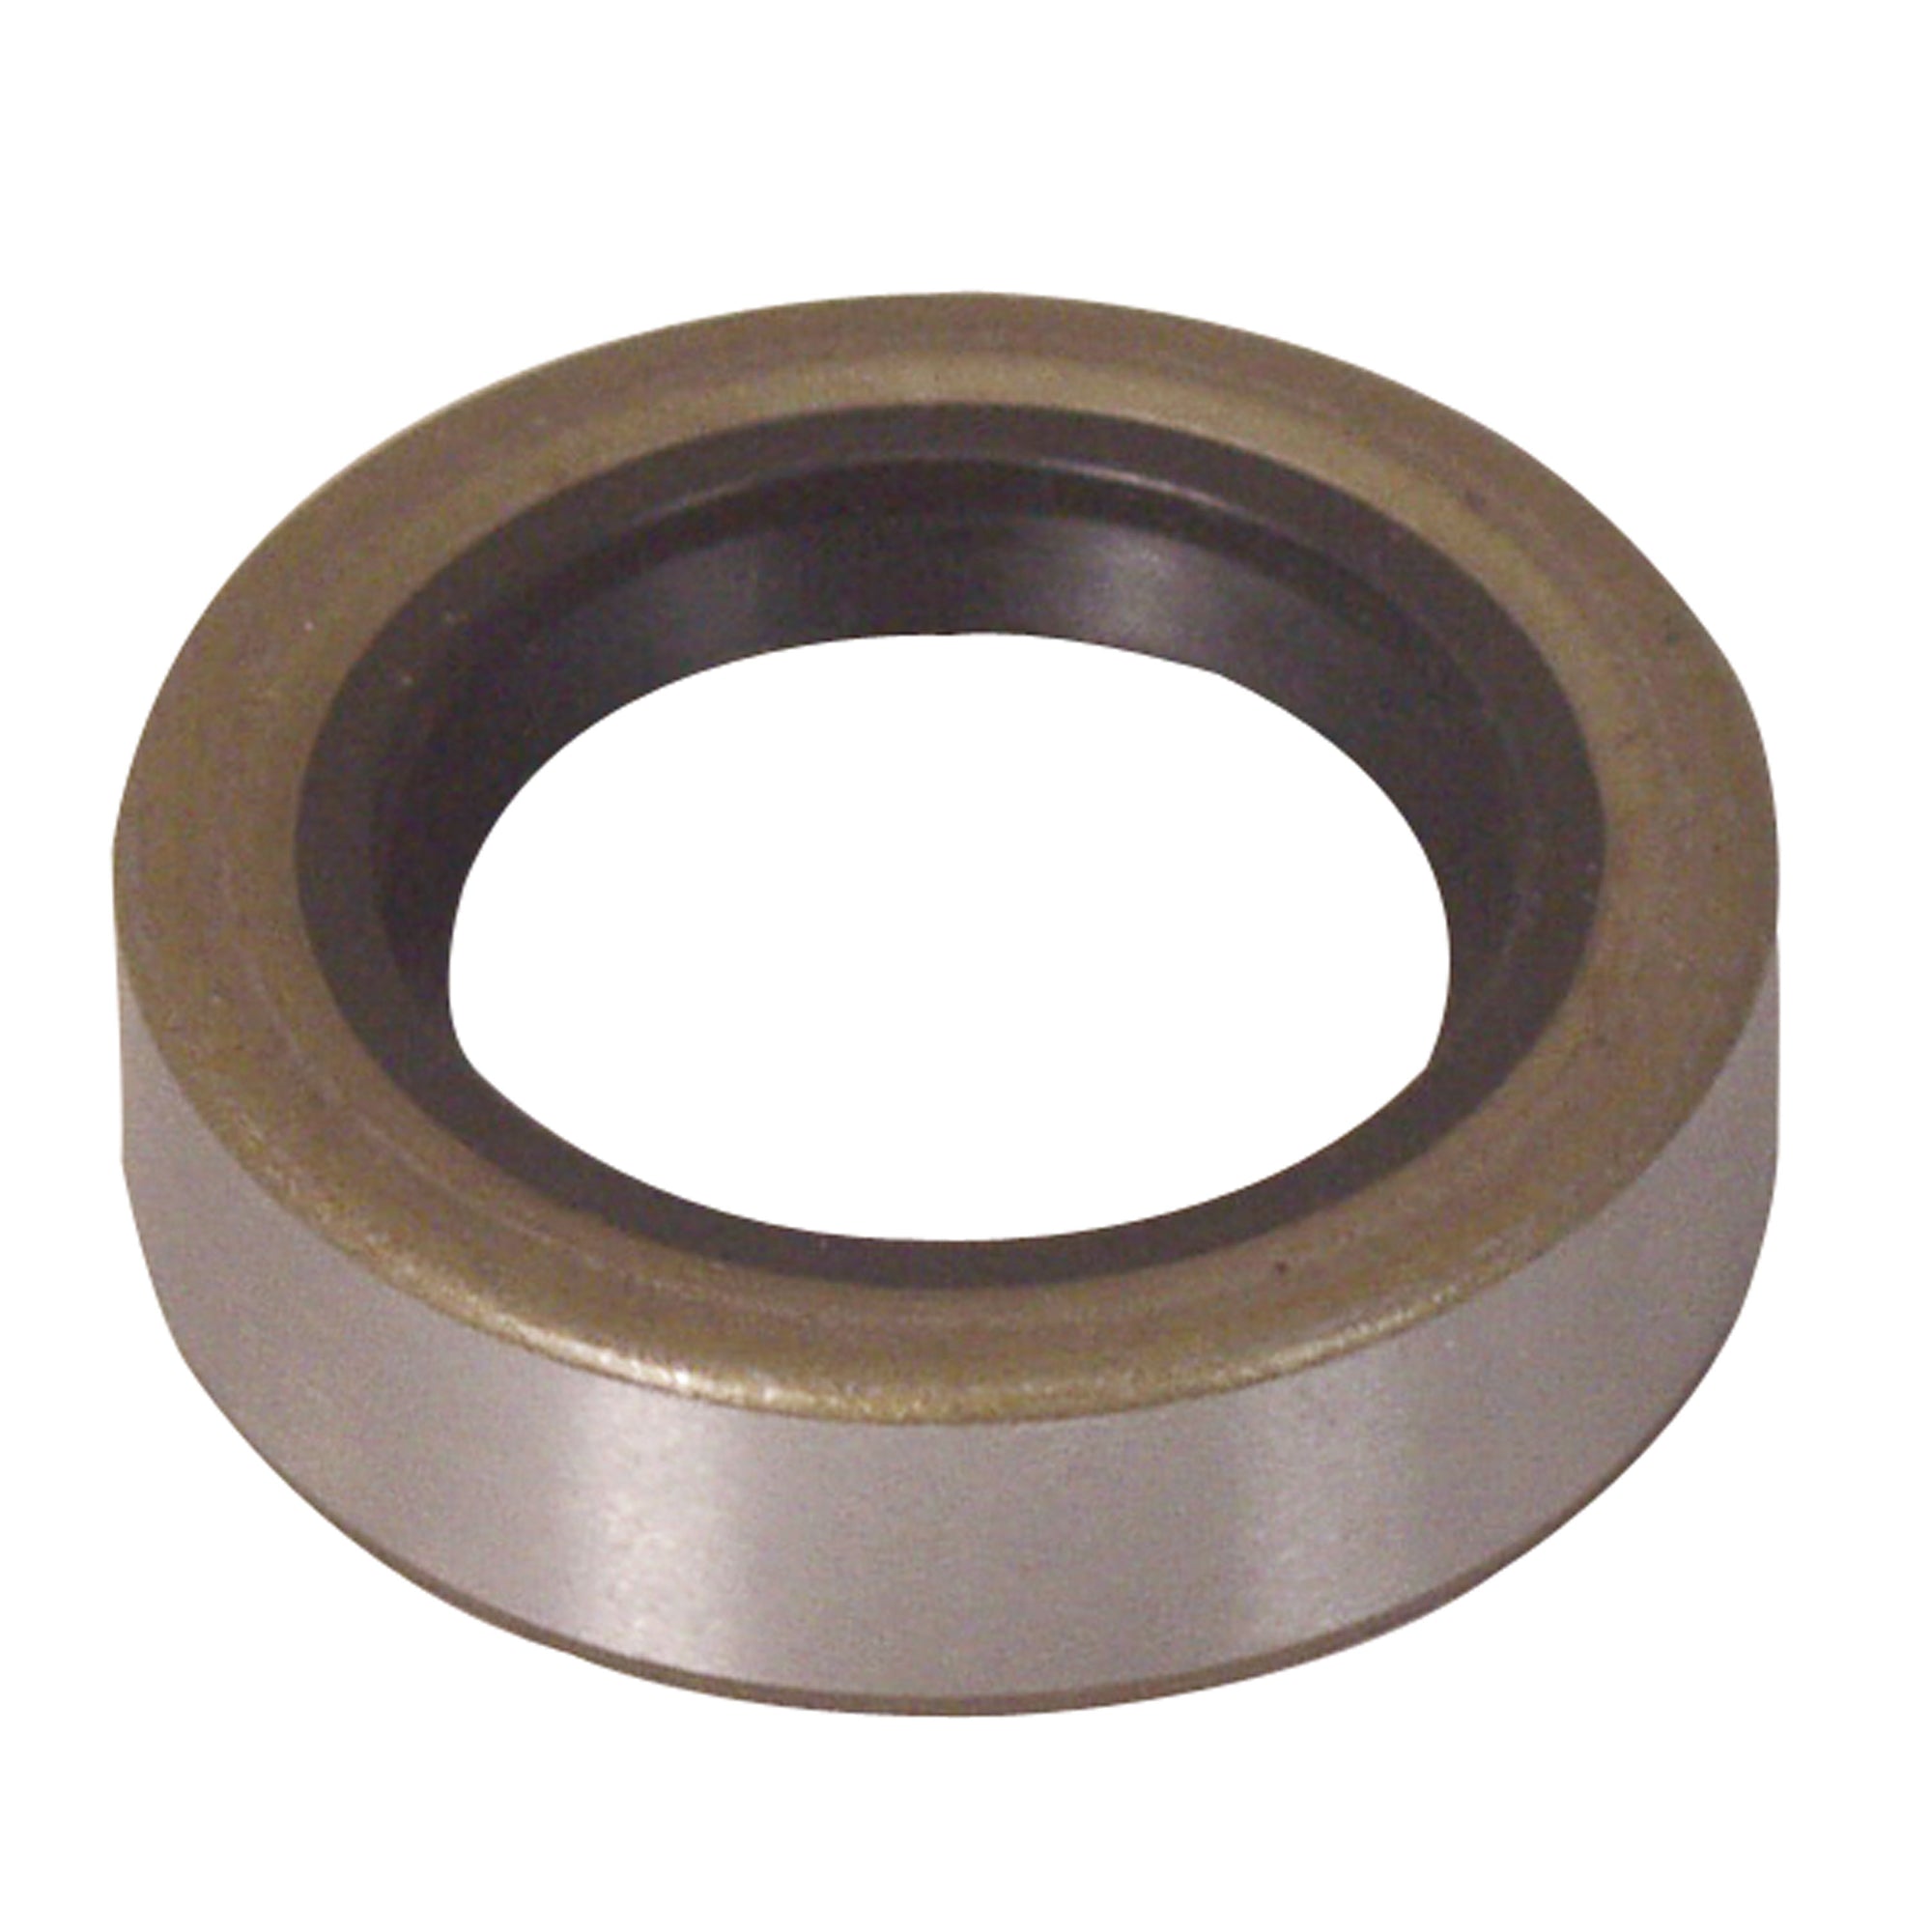 Dutton-Lainson 21815 Grease Seal - 1-3/8 in.